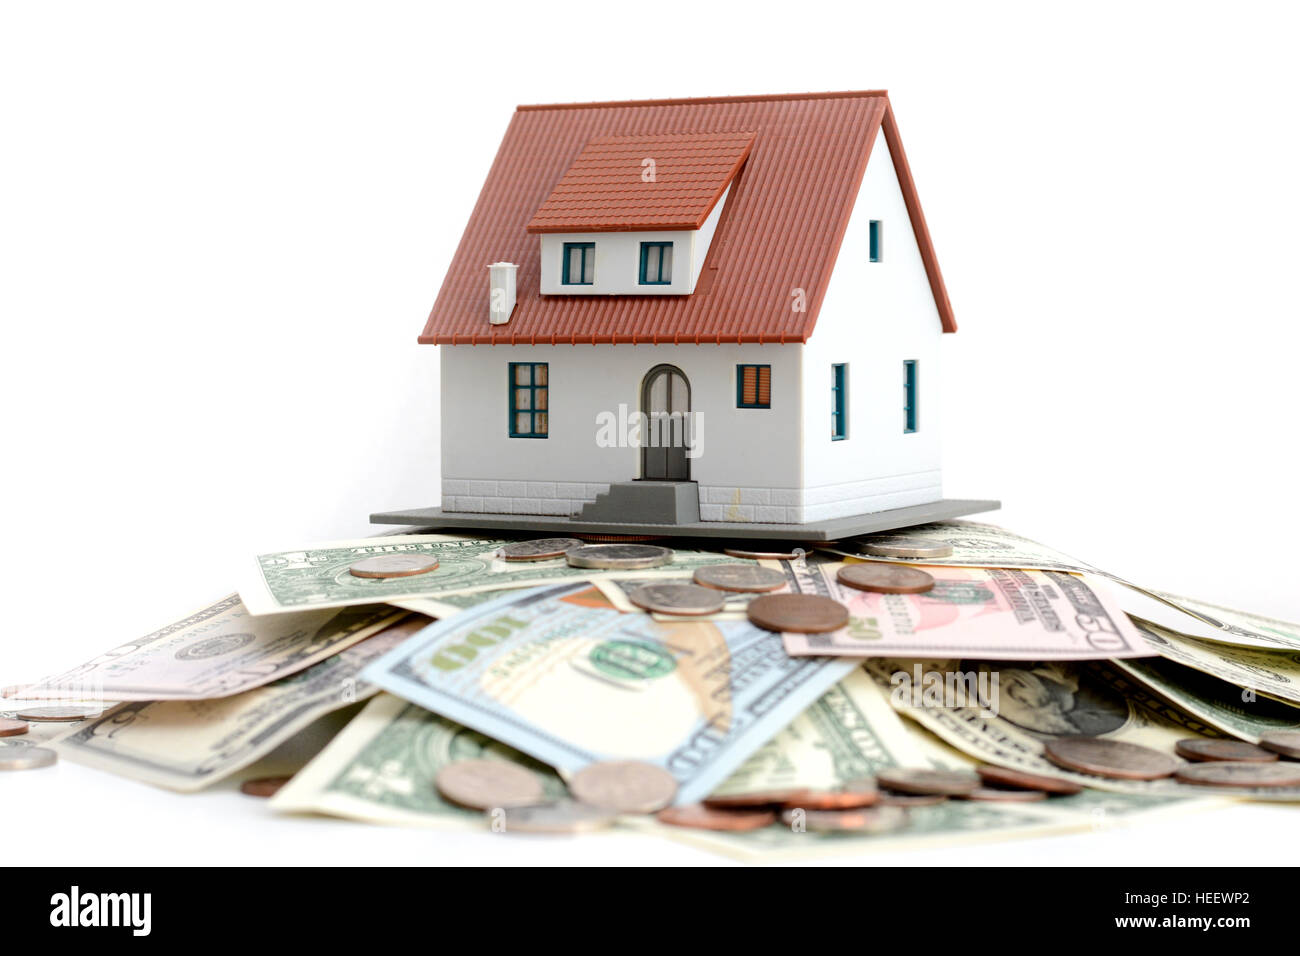 Model house on top of money pile suggesting savings for a house Stock Photo